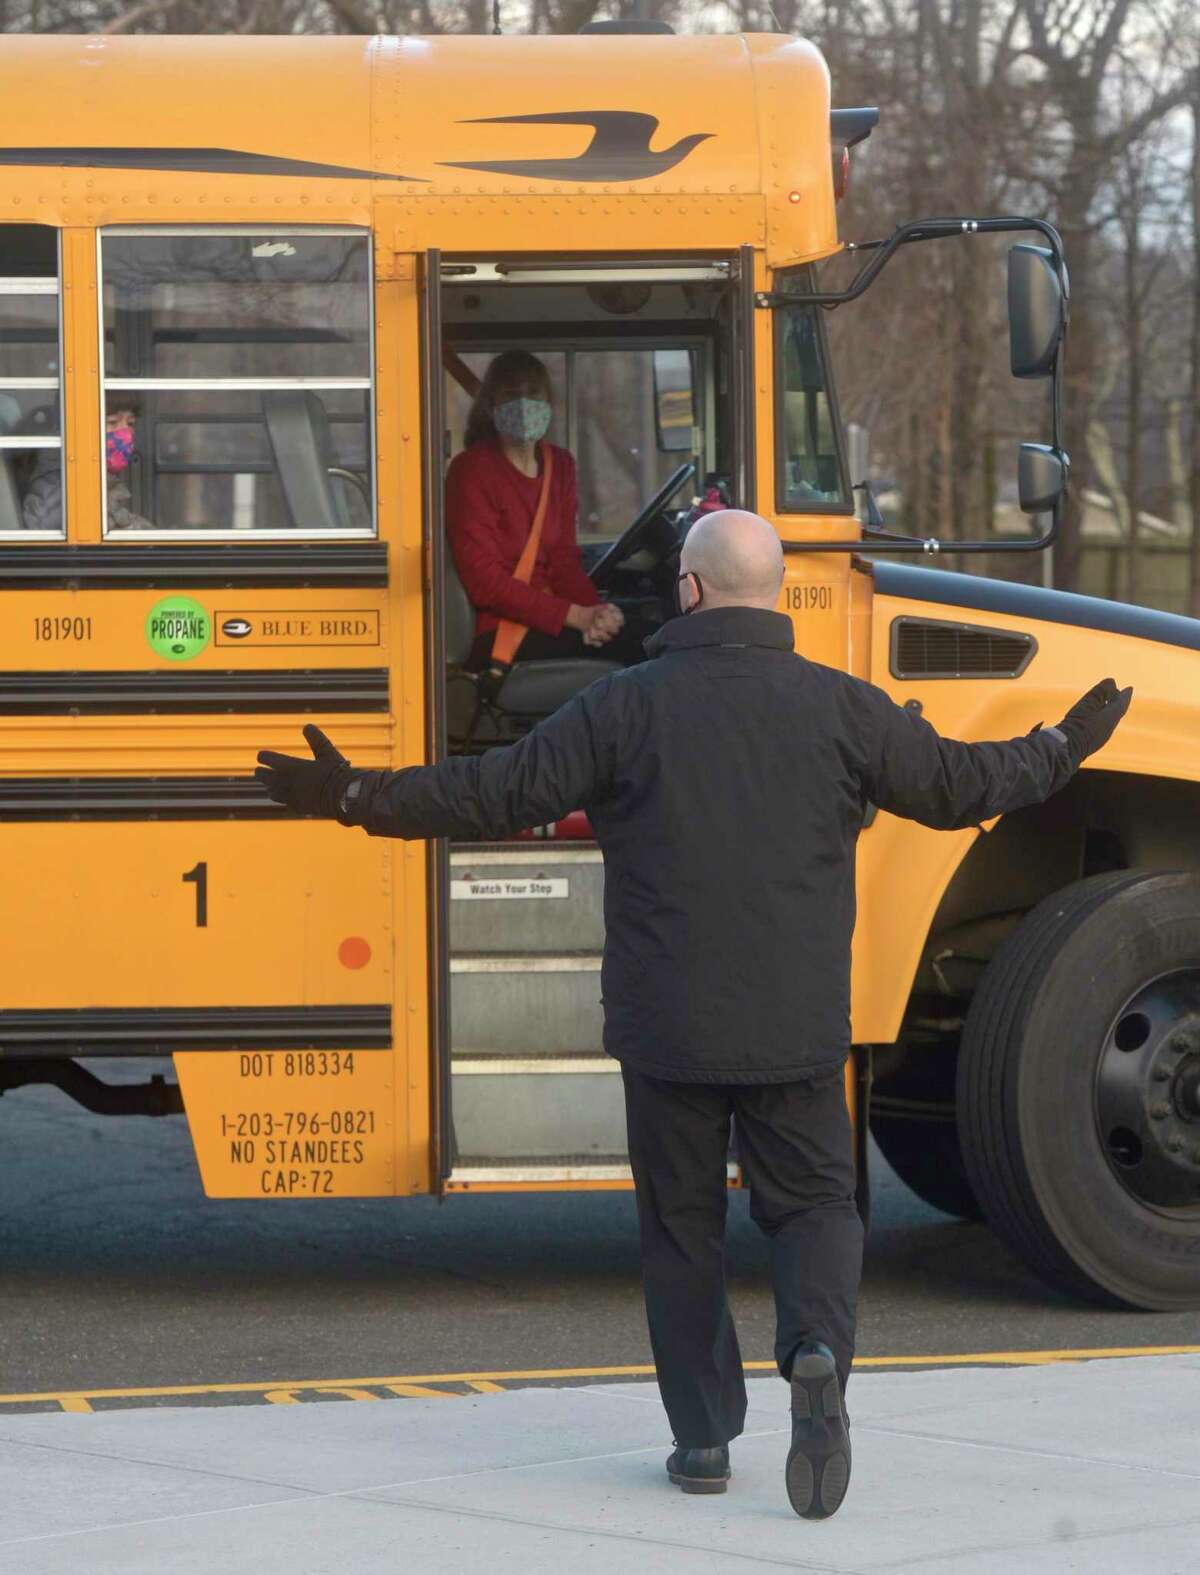 Stadley Rough Elementary School principal Lenny Cerlich welcomes students and their bus driver back to school for the first time since March of 2020. Tuesday, January 19, 2021, in Danbury, Conn.